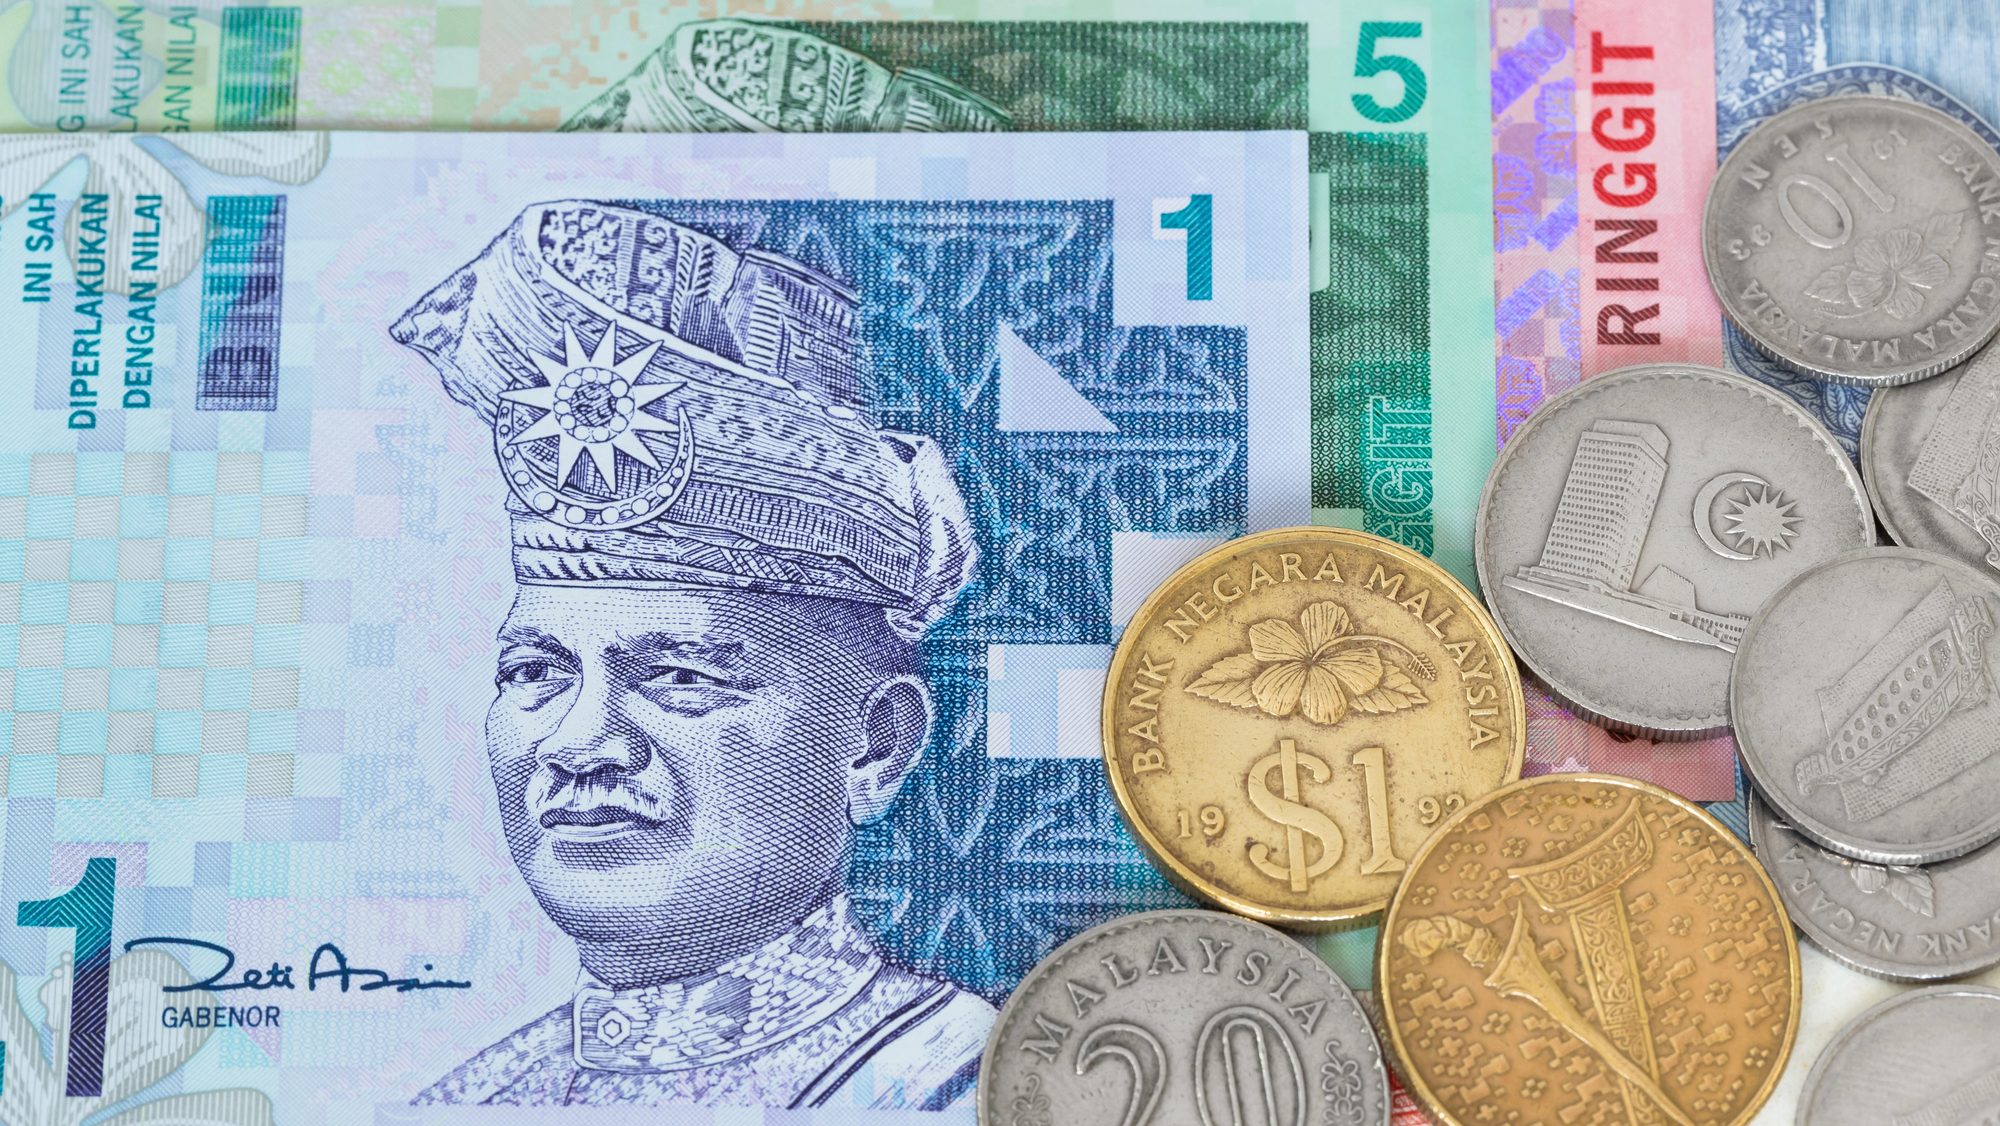 Malaysian money ringgit banknote and coins